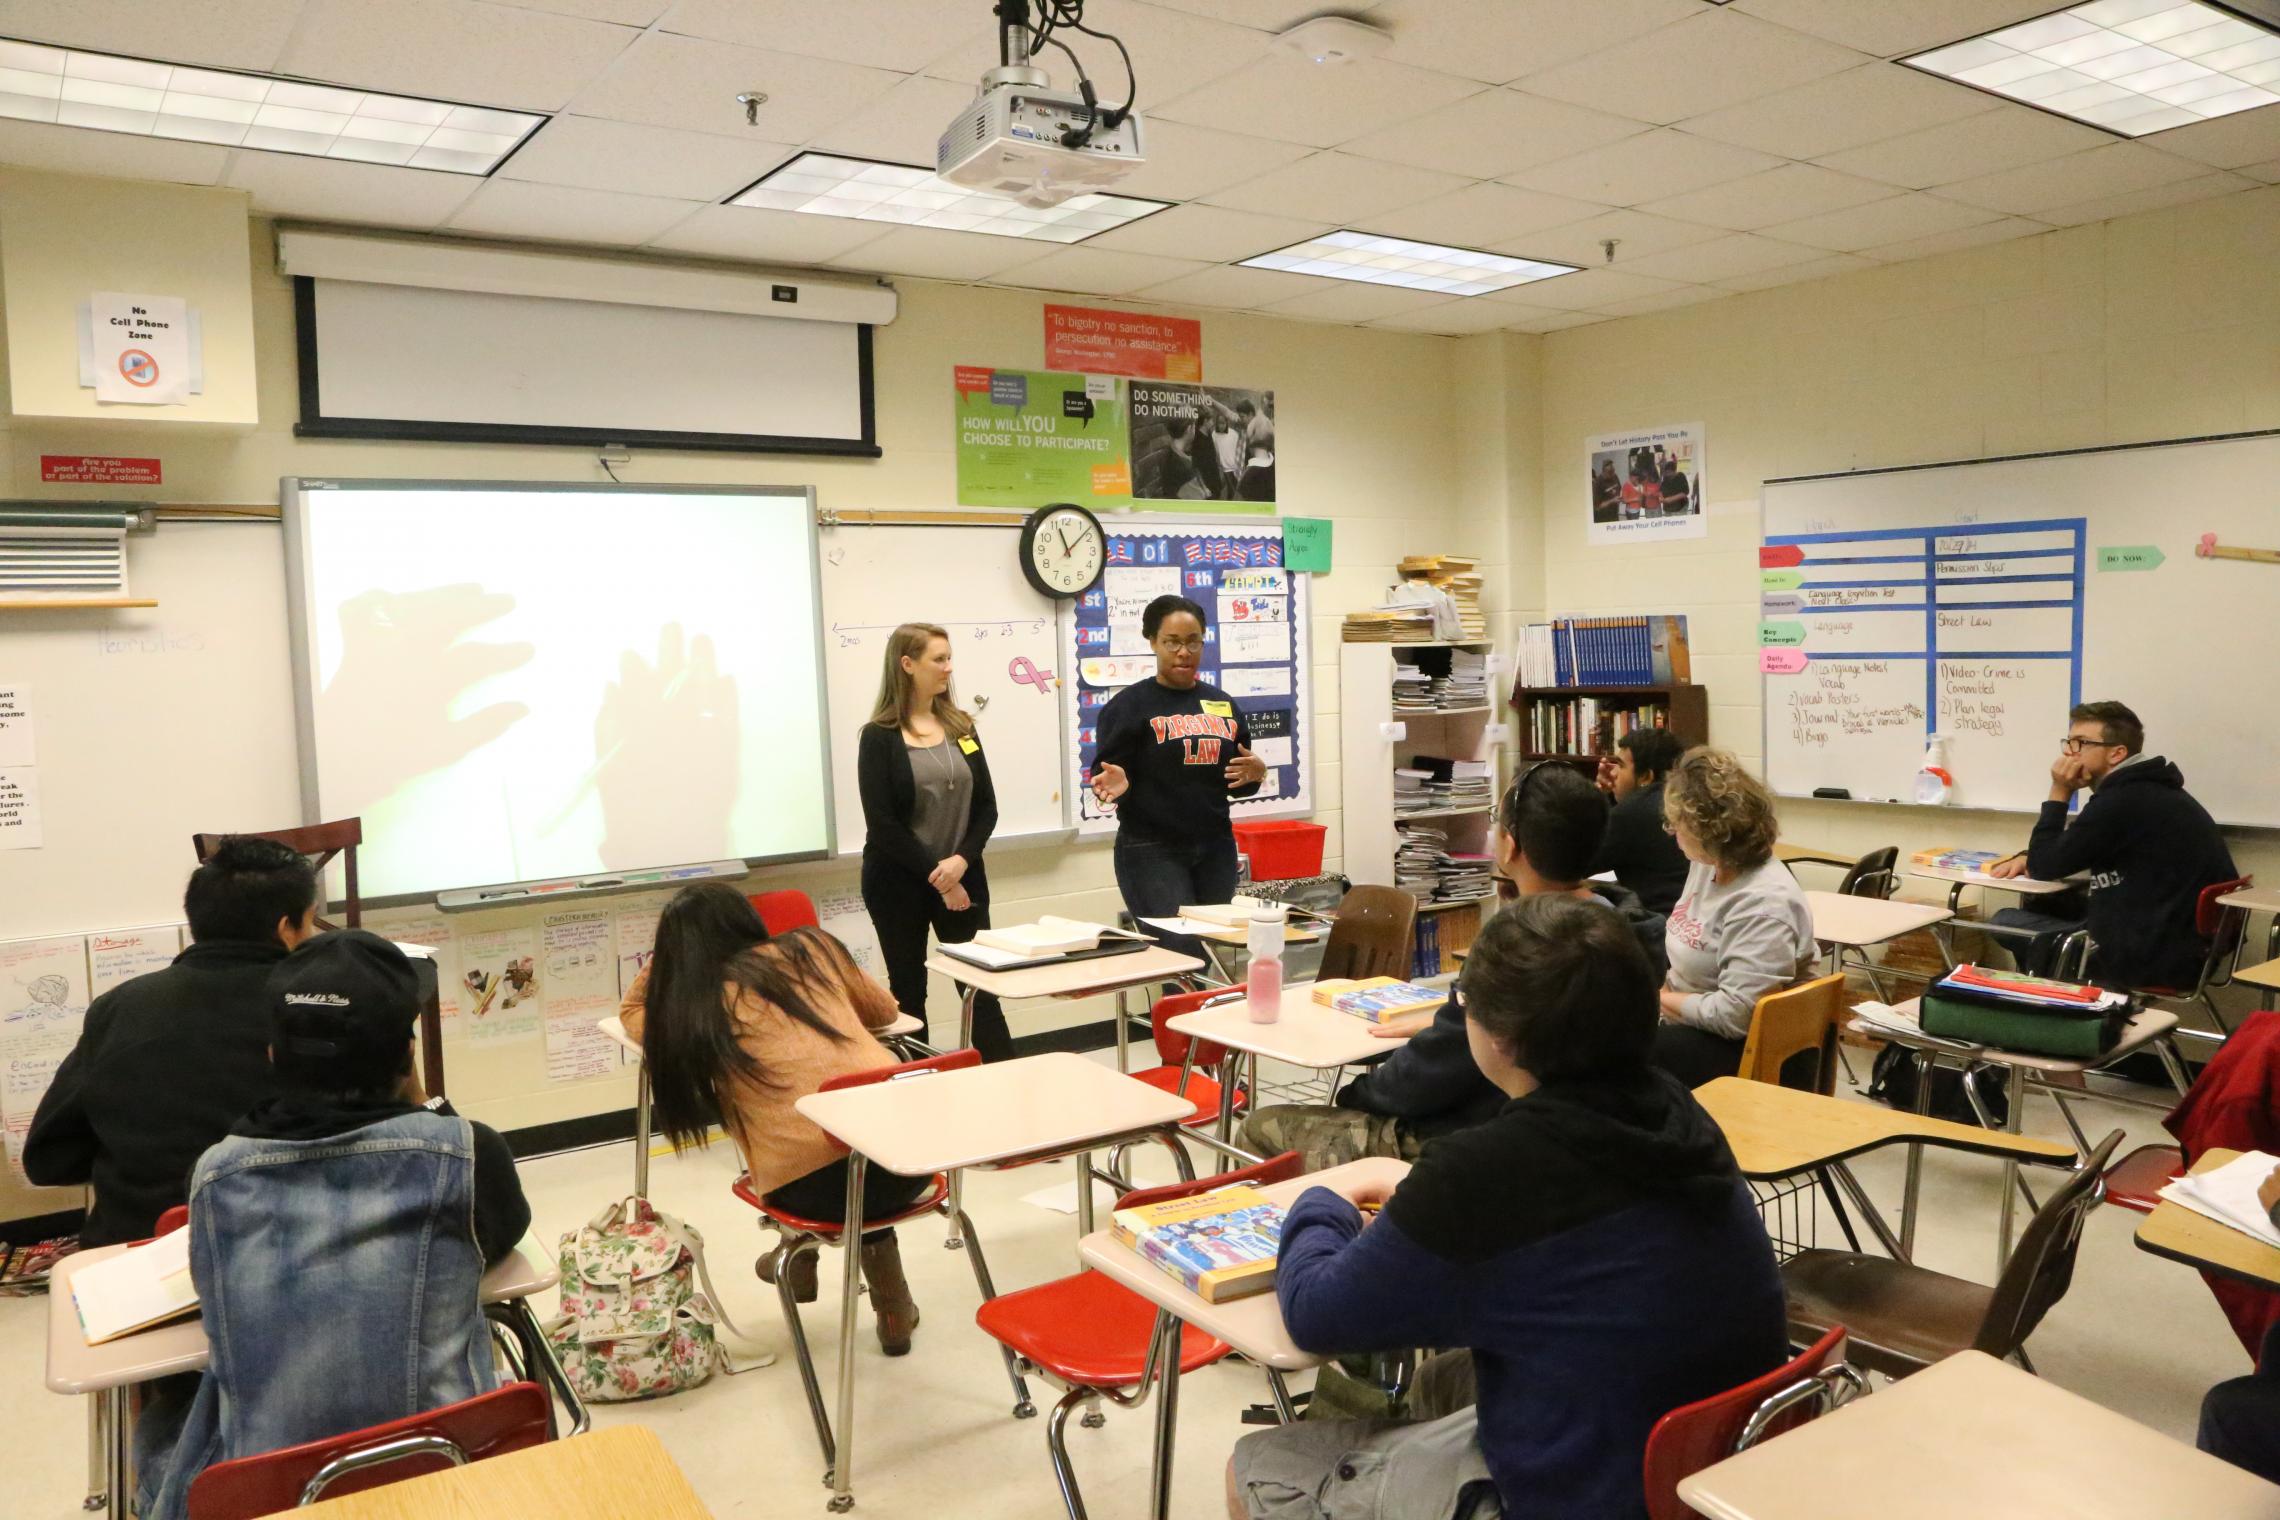 Through ‘street Law Uva Law Students Take Classroom Lessons To Area